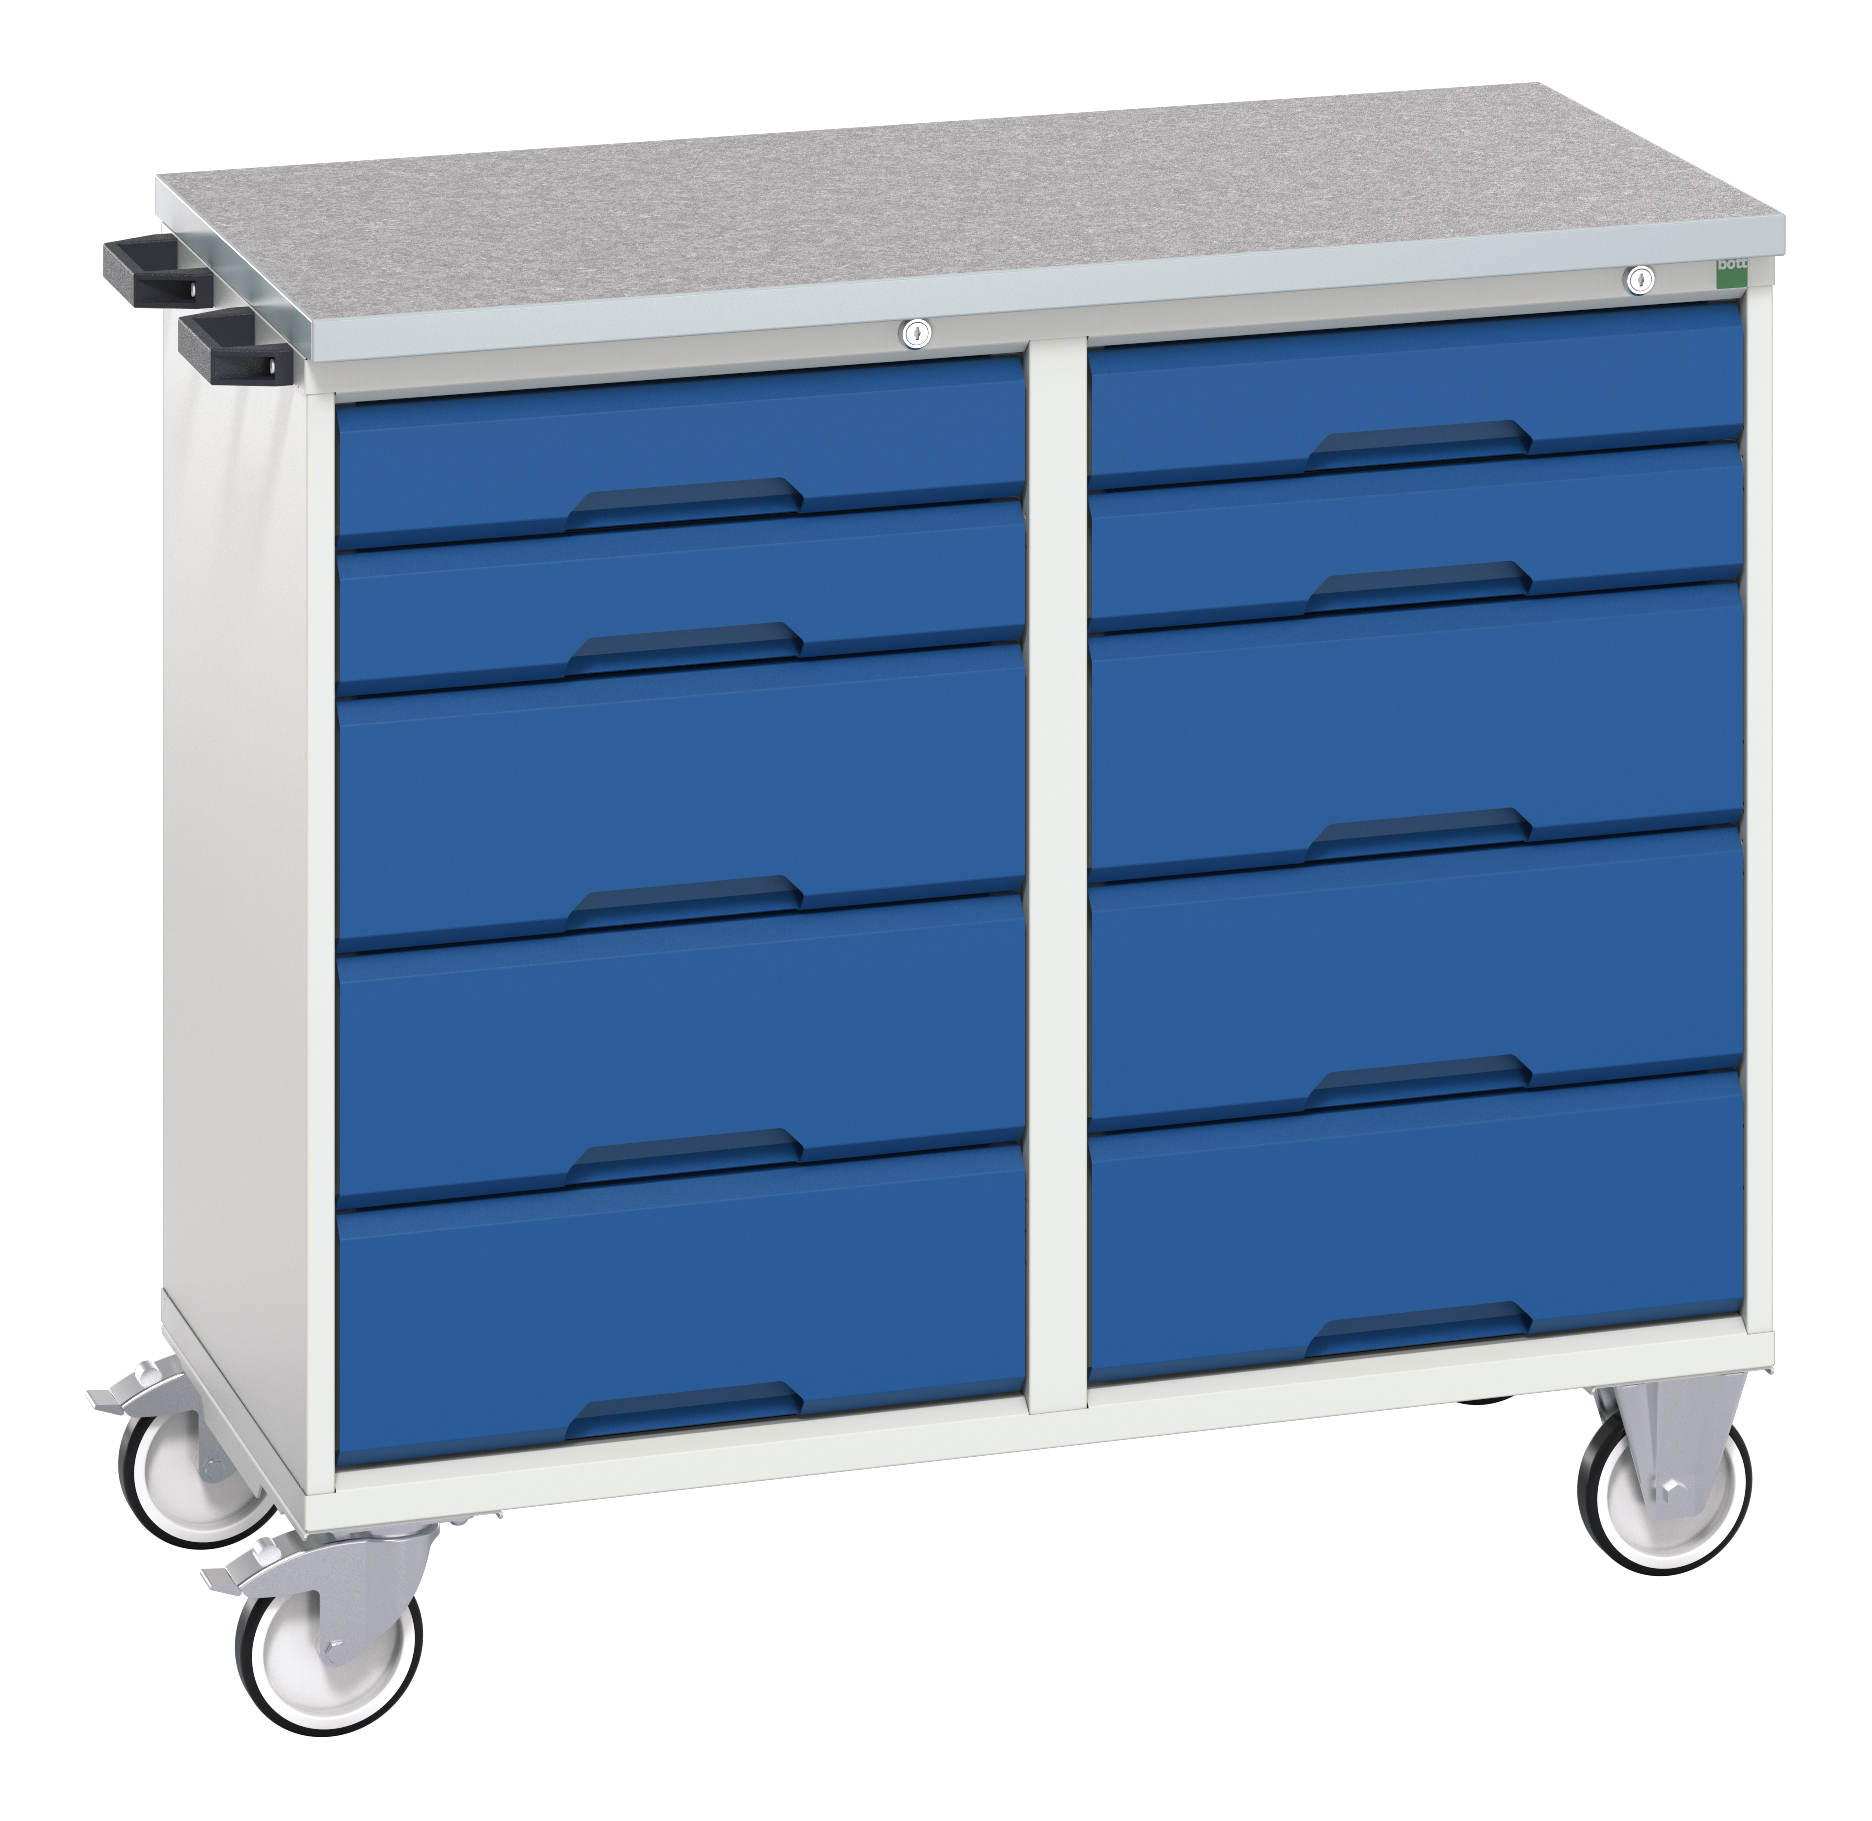 Bott Verso Maintenance Trolley With 10 Drawers & Lino Top - 16927100.11